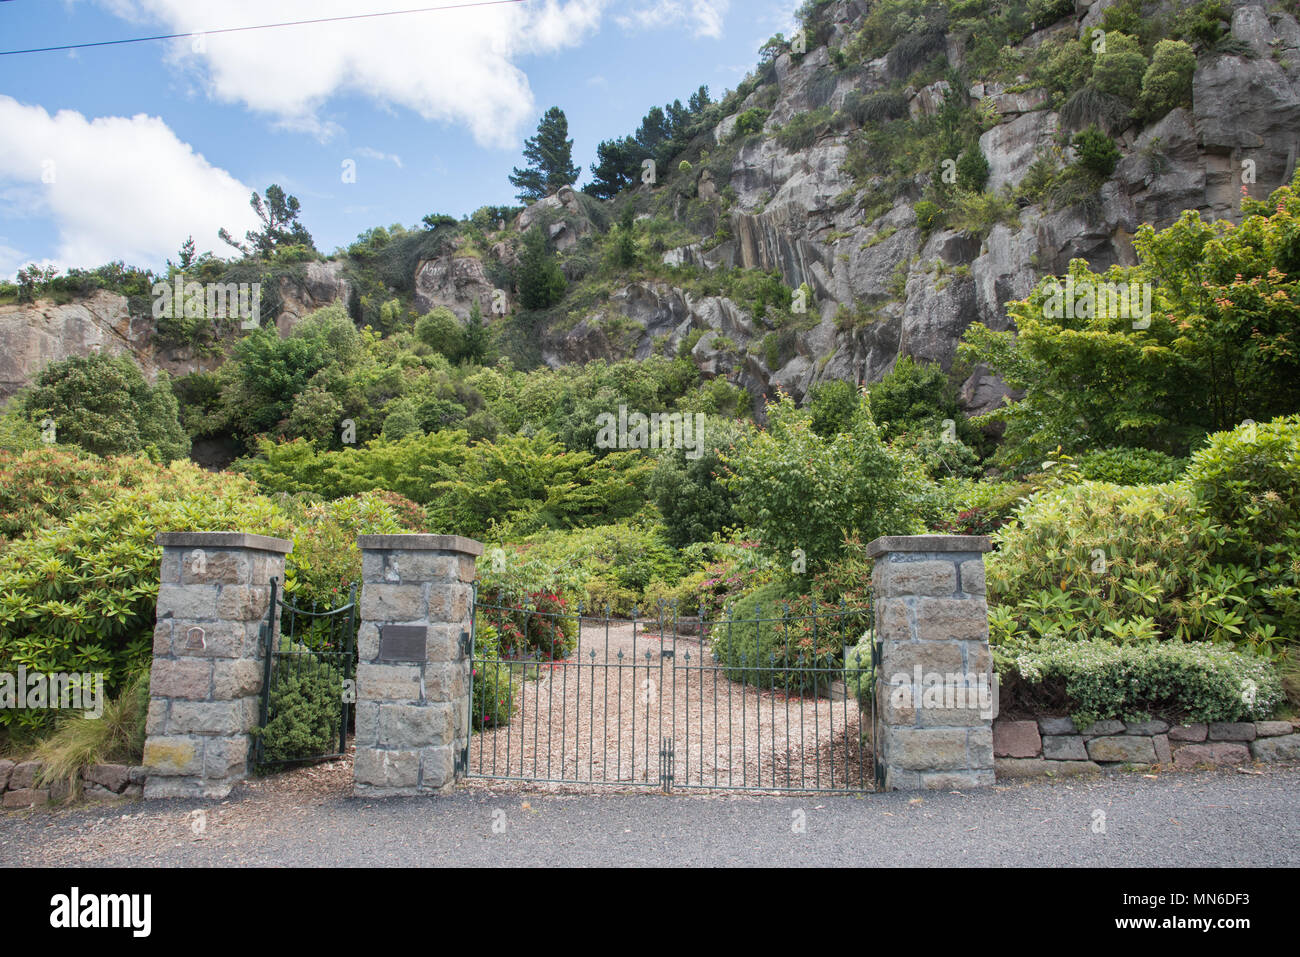 Entrance to the free public Lady Thorn Rhododendron Dell garden with lush greenery and natural rock in Port Chalmers, Dunedin, New Zealand Stock Photo